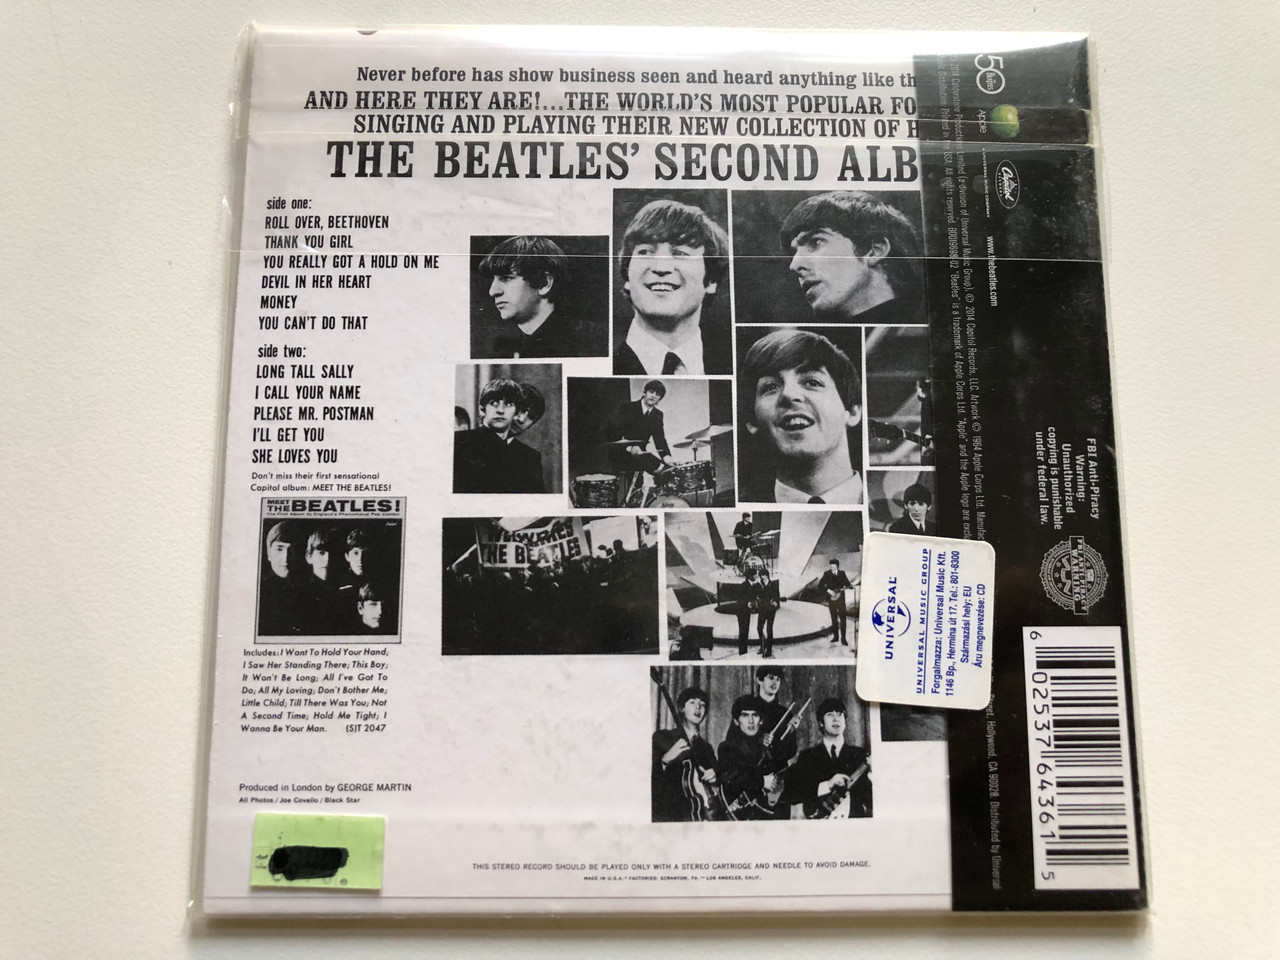 https://cdn10.bigcommerce.com/s-62bdpkt7pb/products/0/images/245397/The_Beatles_Second_Album_Featuring_She_Loves_You_And_Roll_Over_Beethoven_Entire_Album_Presented_In_Both_Mono_And_Stereo_Roll_Over_Beethoven_Thank_You_Girl_You_Really_Got_A_Hold_O__68205.1659545476.1280.1280.JPG?c=2&_gl=1*1jksiwi*_ga*MjA2NTIxMjE2MC4xNTkwNTEyNTMy*_ga_WS2VZYPC6G*MTY1OTU0MTQzMS41MTIuMS4xNjU5NTQ1MTk0LjYw